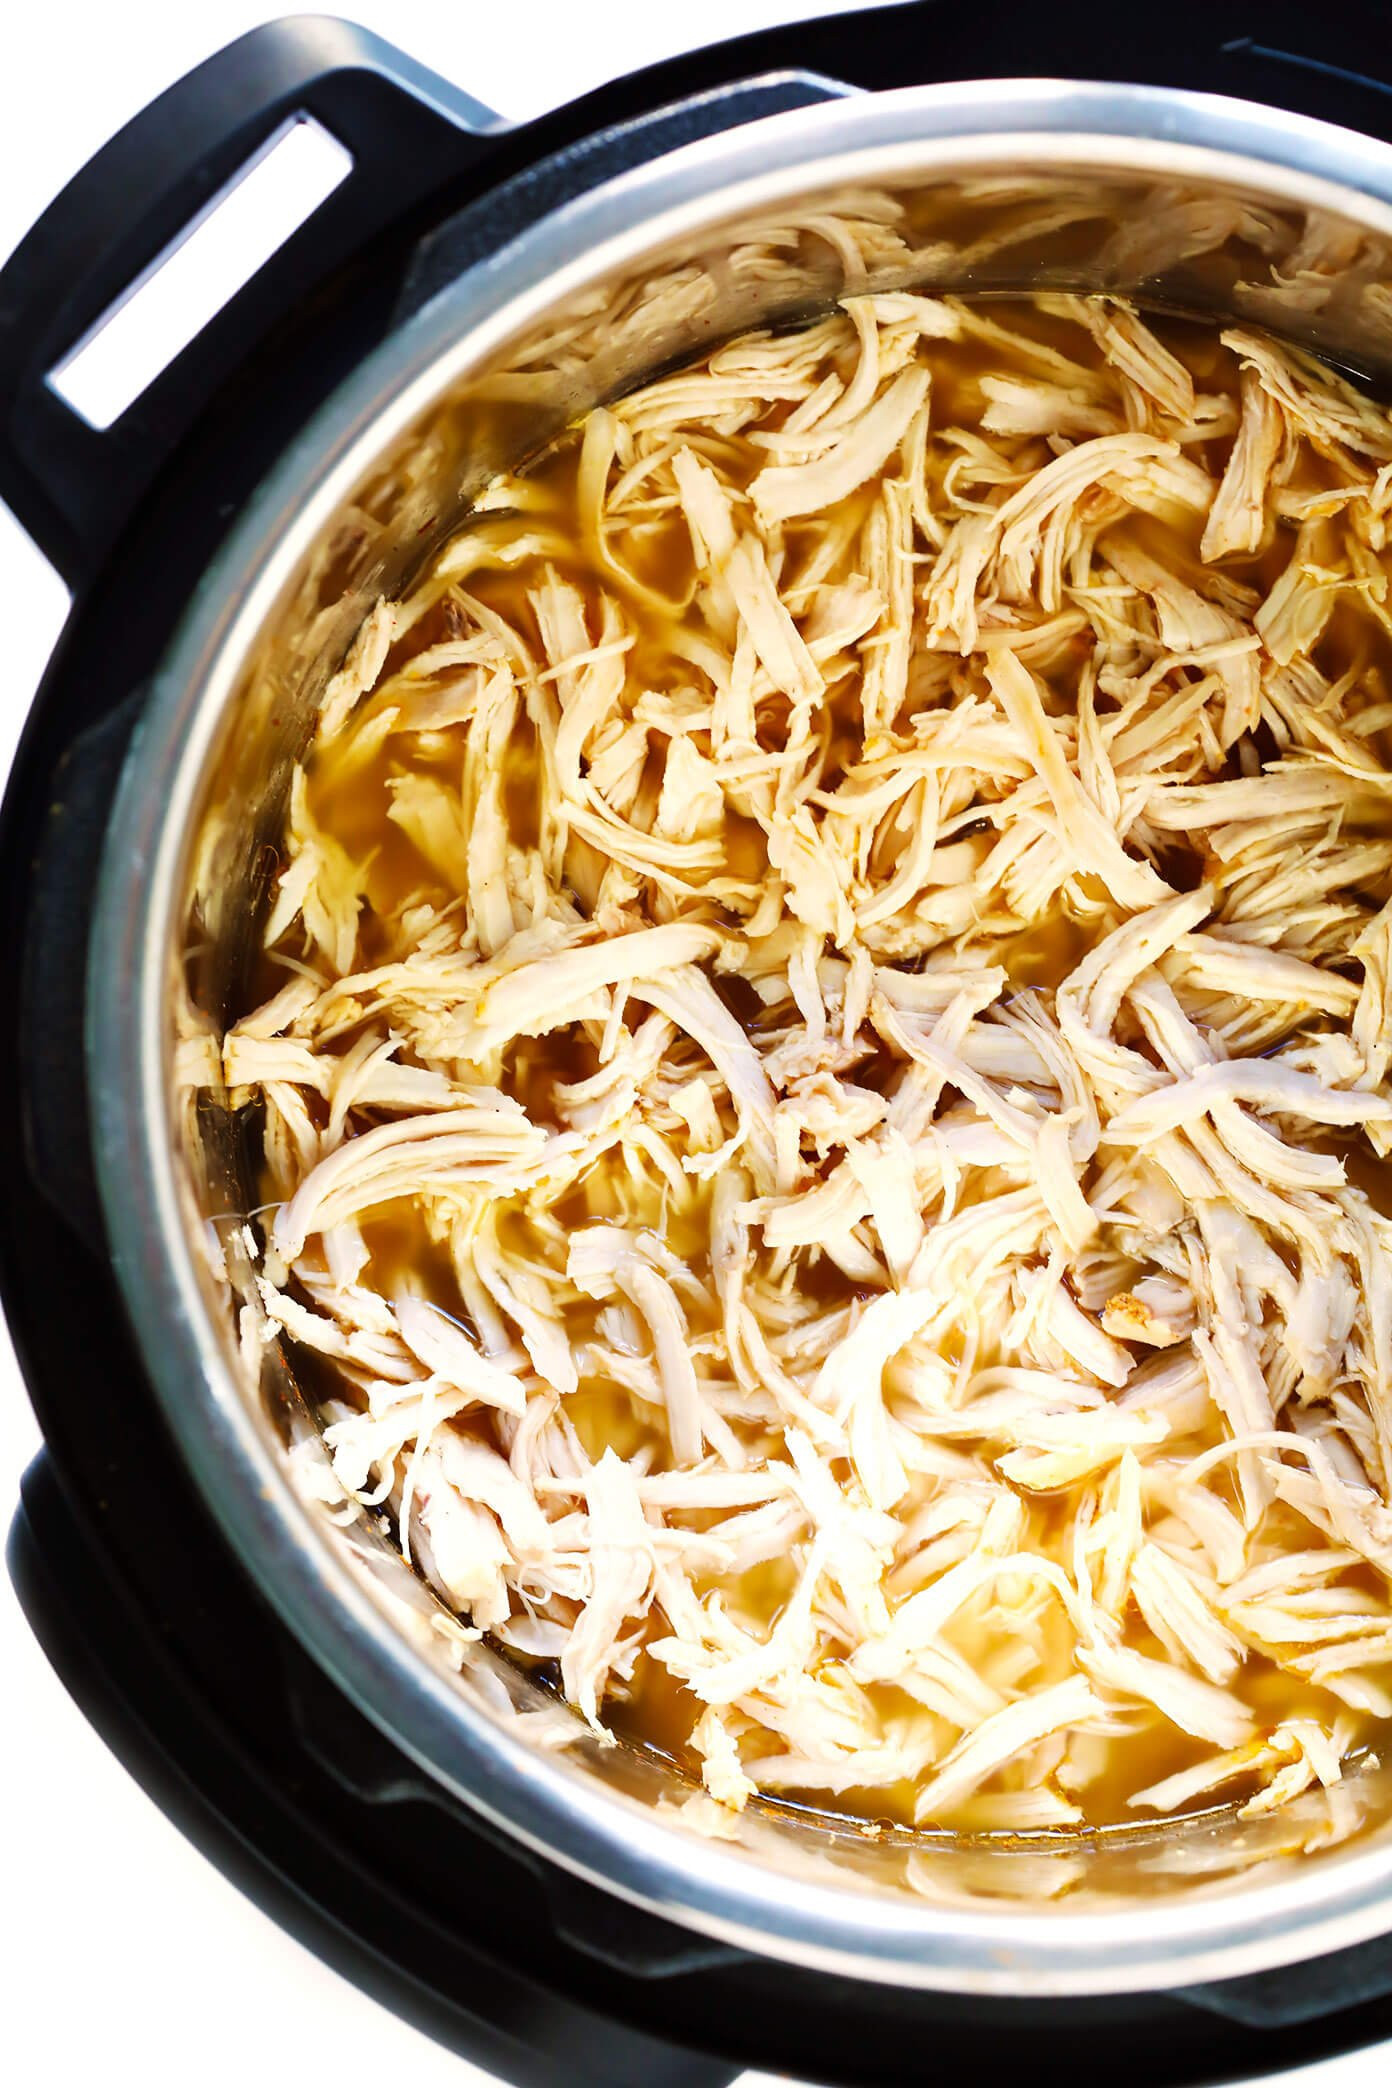 Don’t Miss Our 15 Most Shared Instant Pot Shredded Chicken Recipes